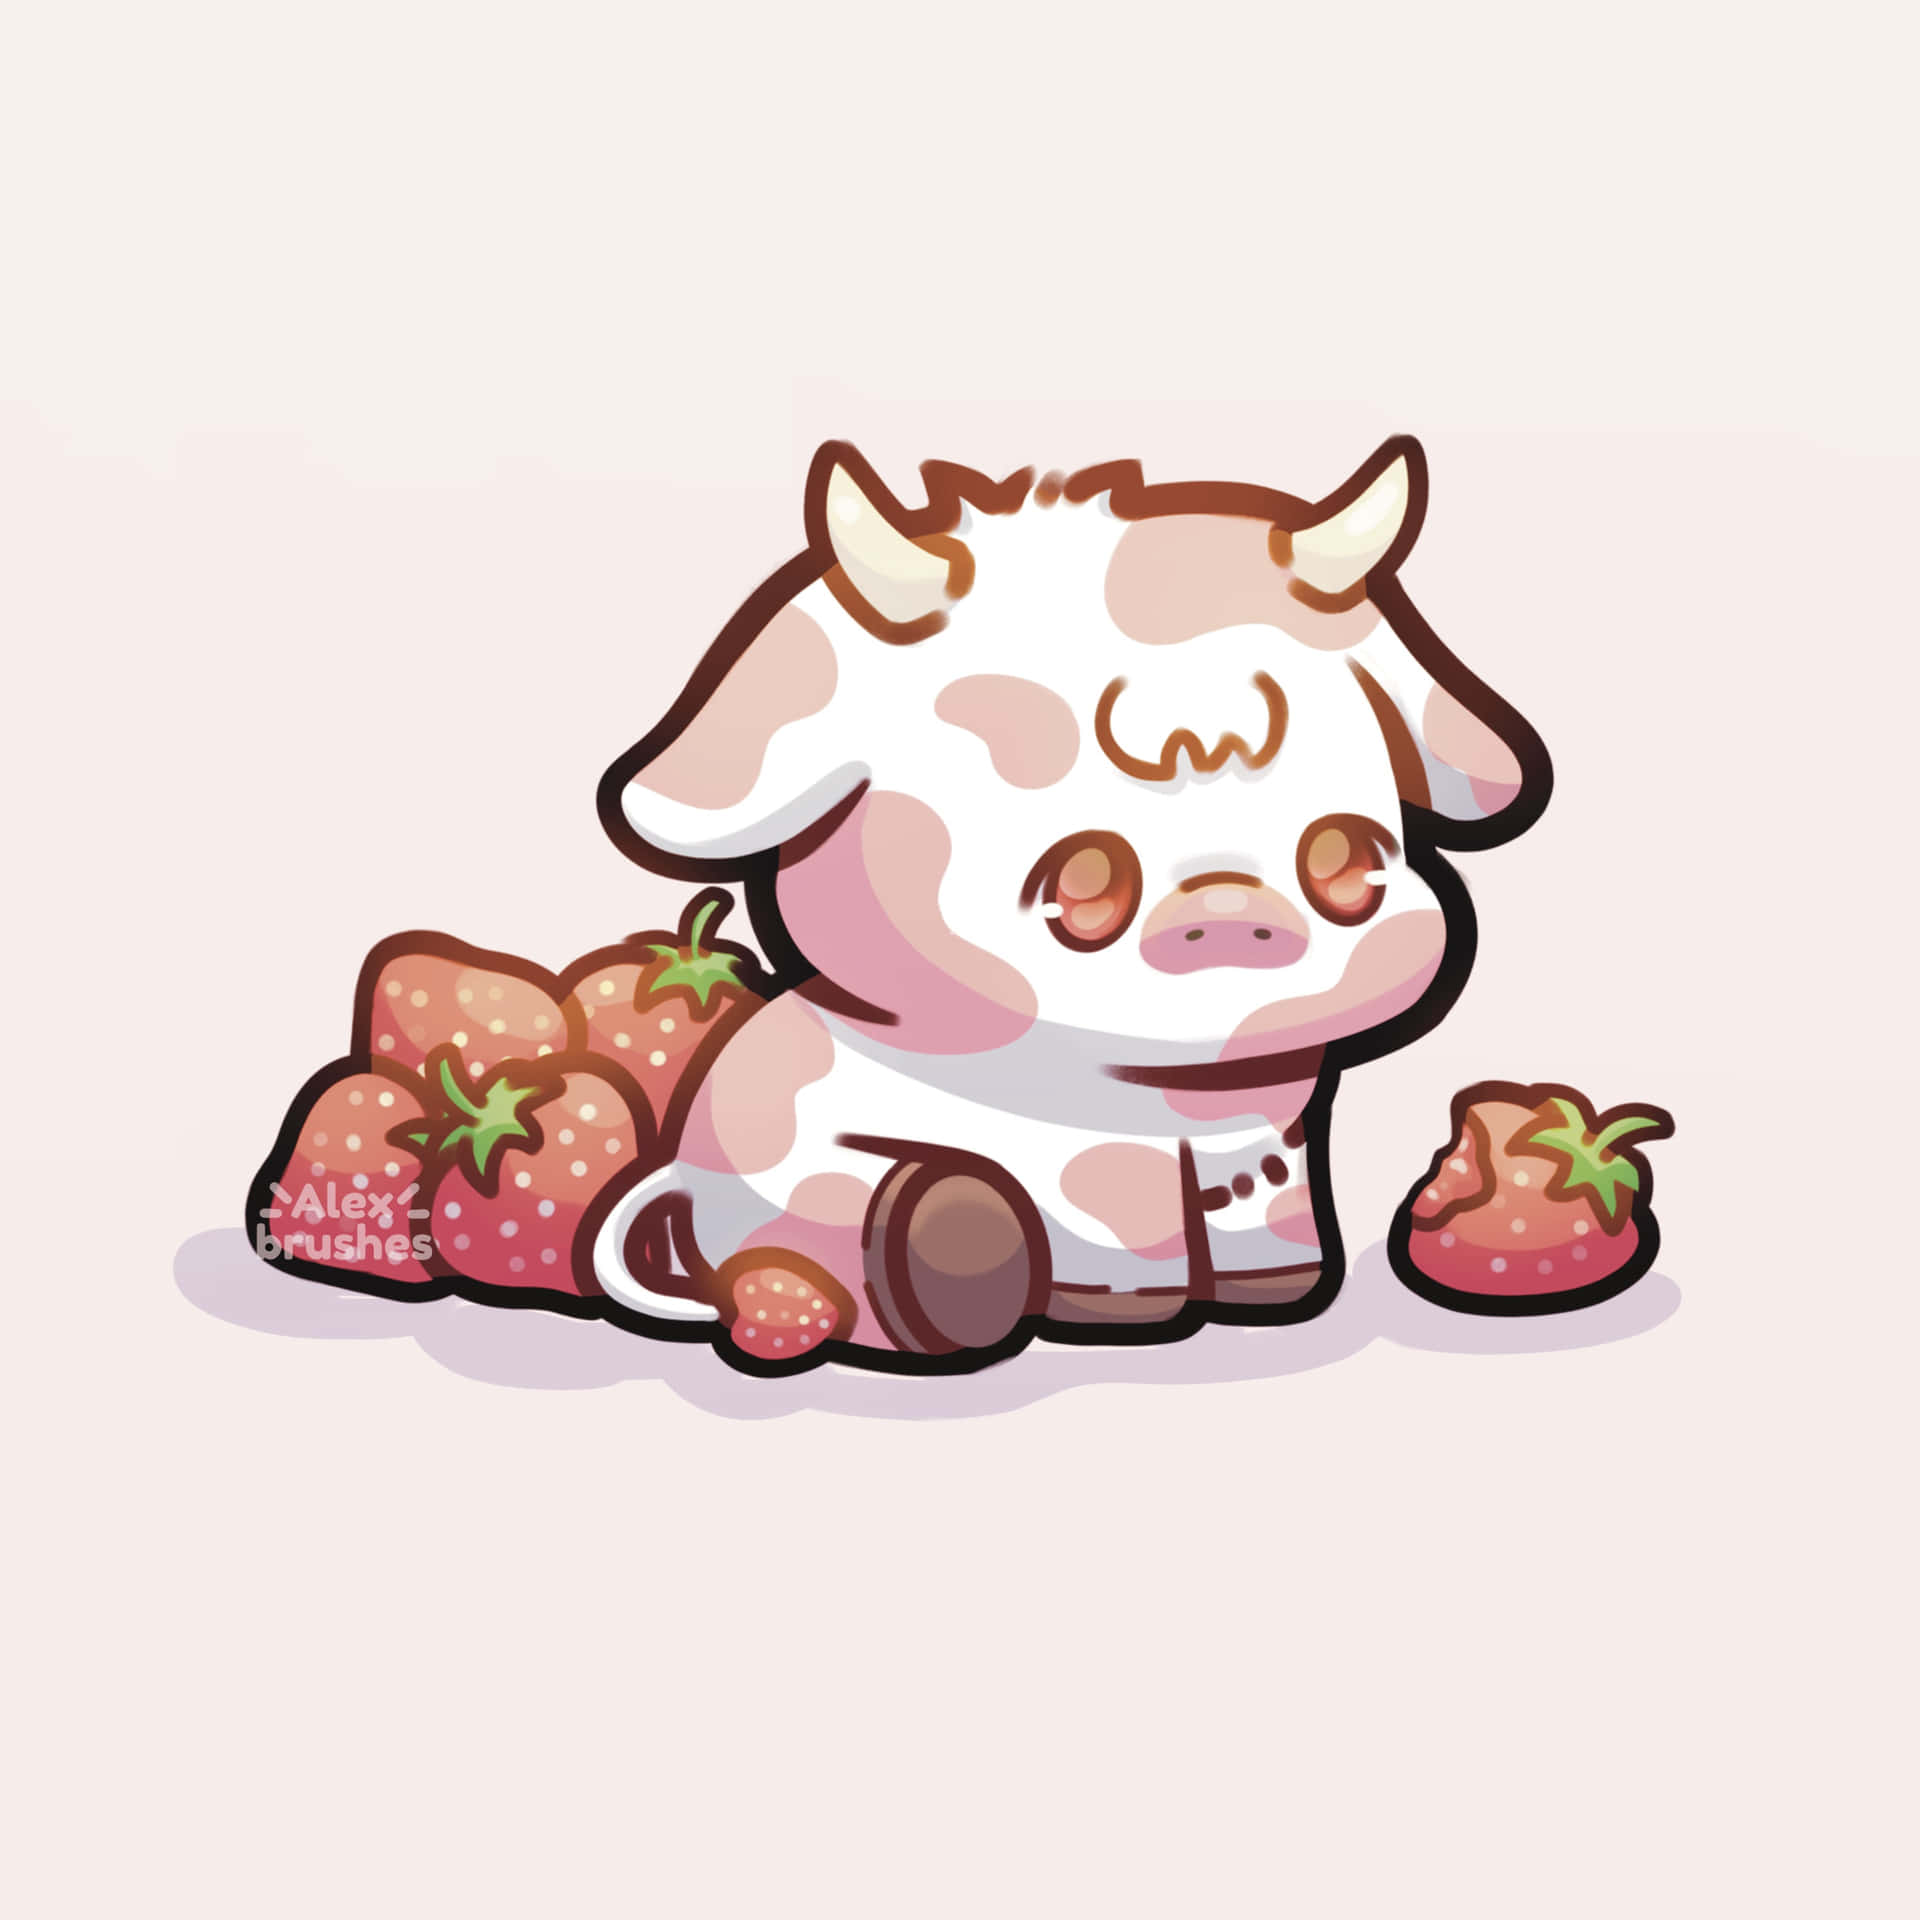 Playful Strawberry Cow frolicking in a colorful meadow